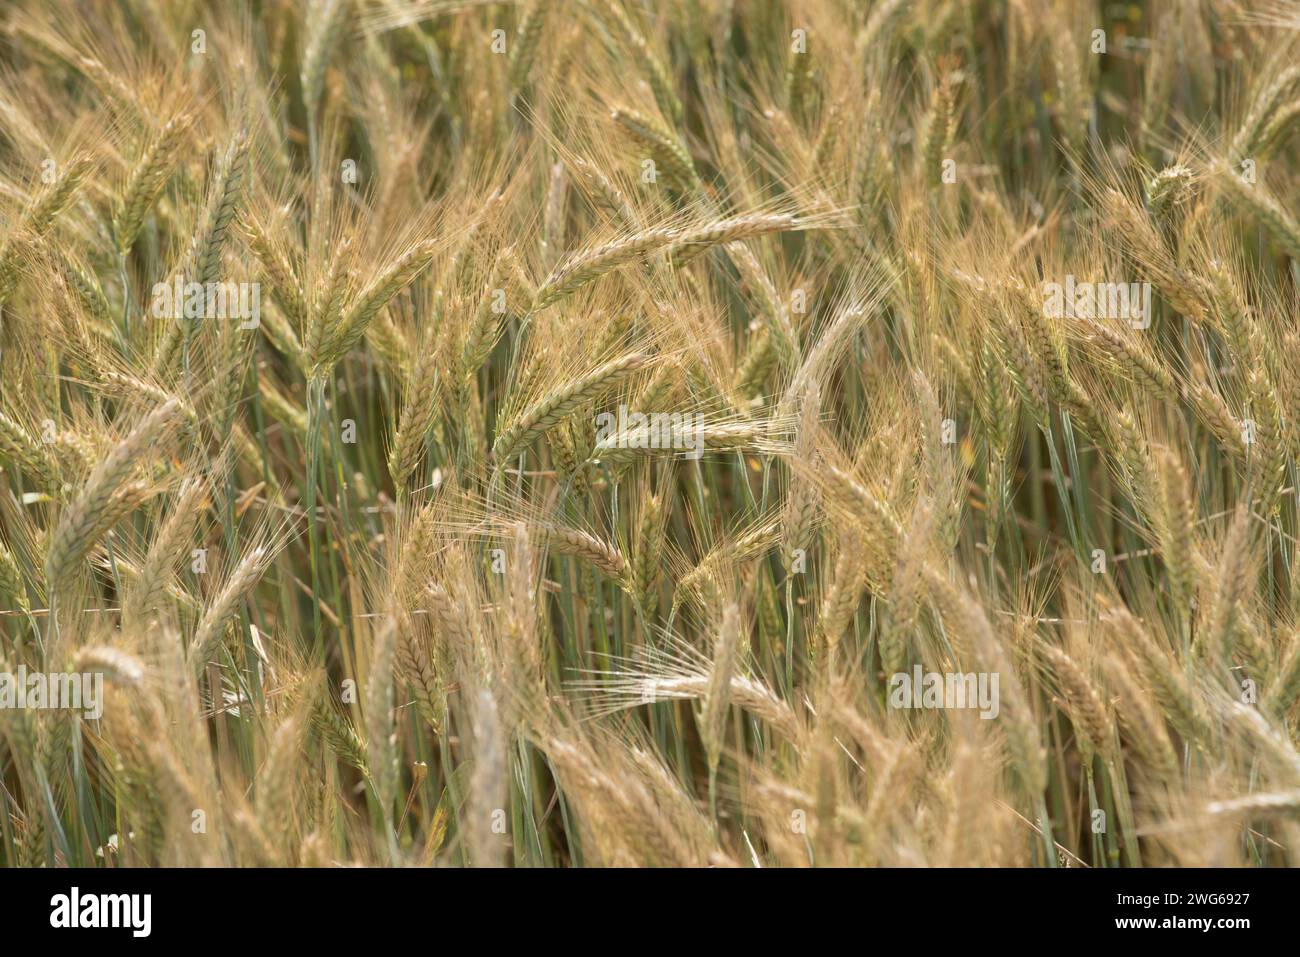 Wheat field in agriculture, growing cereal crops for food production a wheat field in agriculture Stock Photo